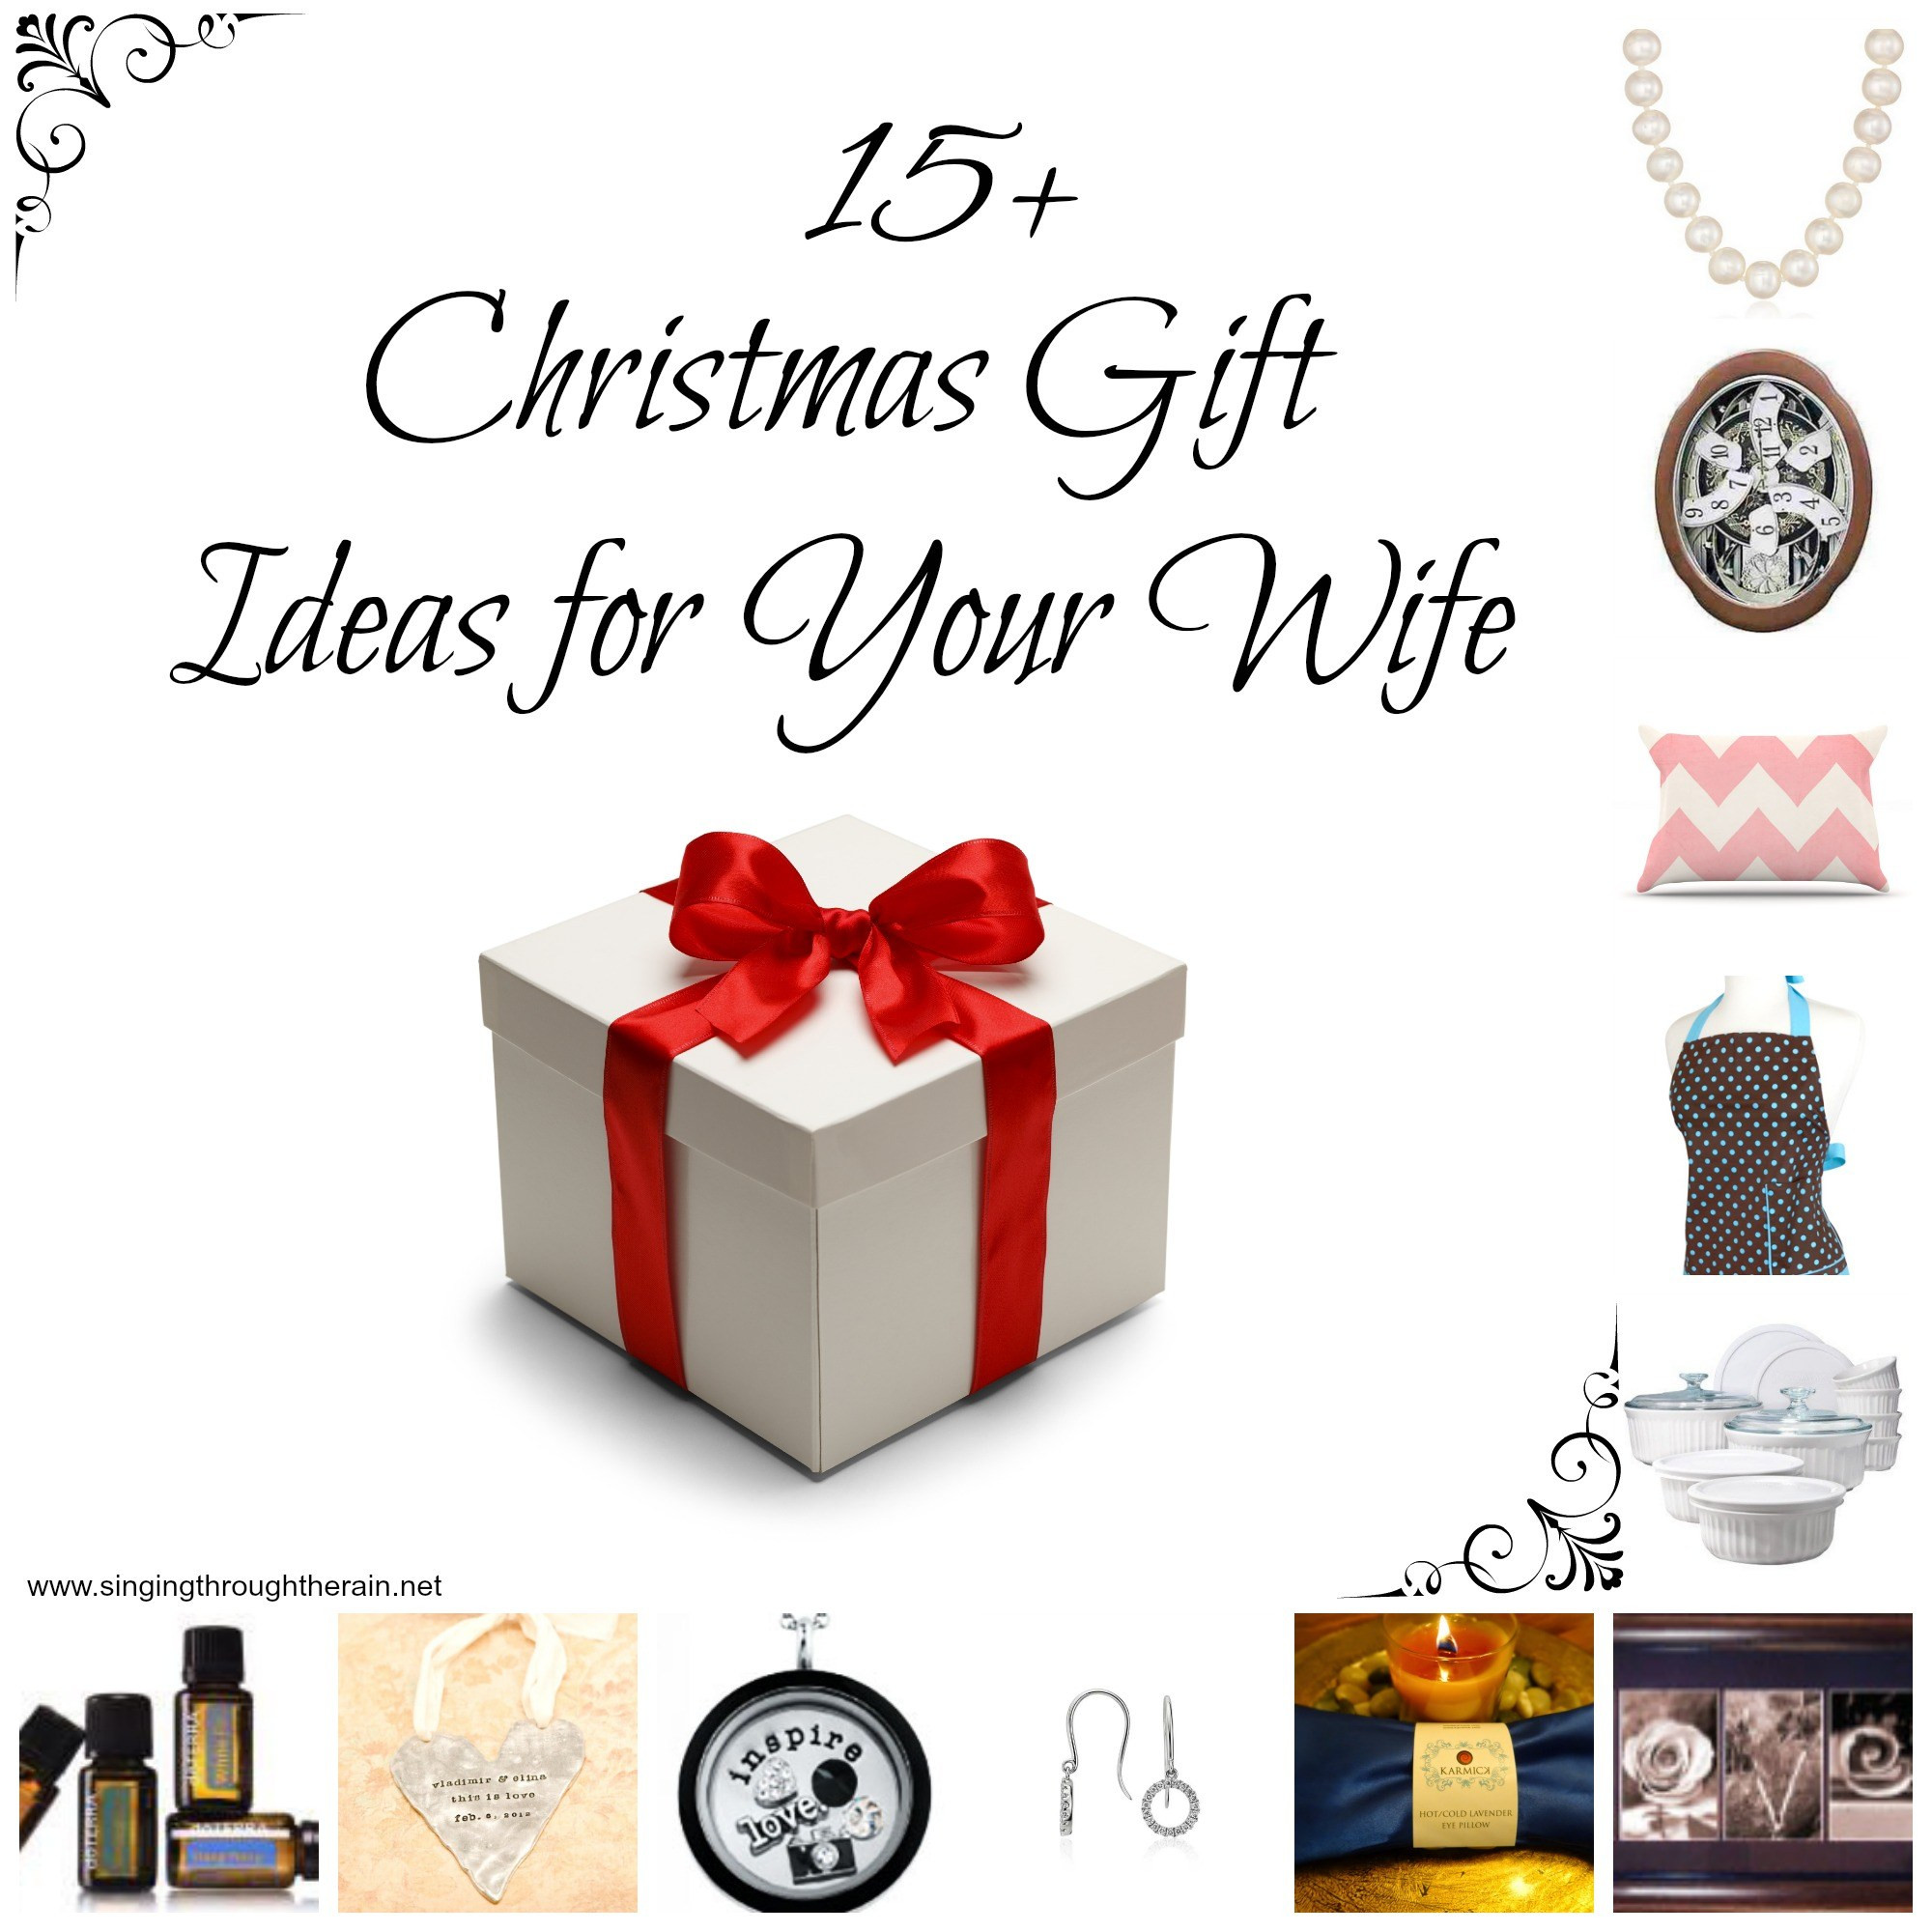 Christmas Gift Ideas For Your Wife
 15 Christmas Gift Ideas for Your Wife